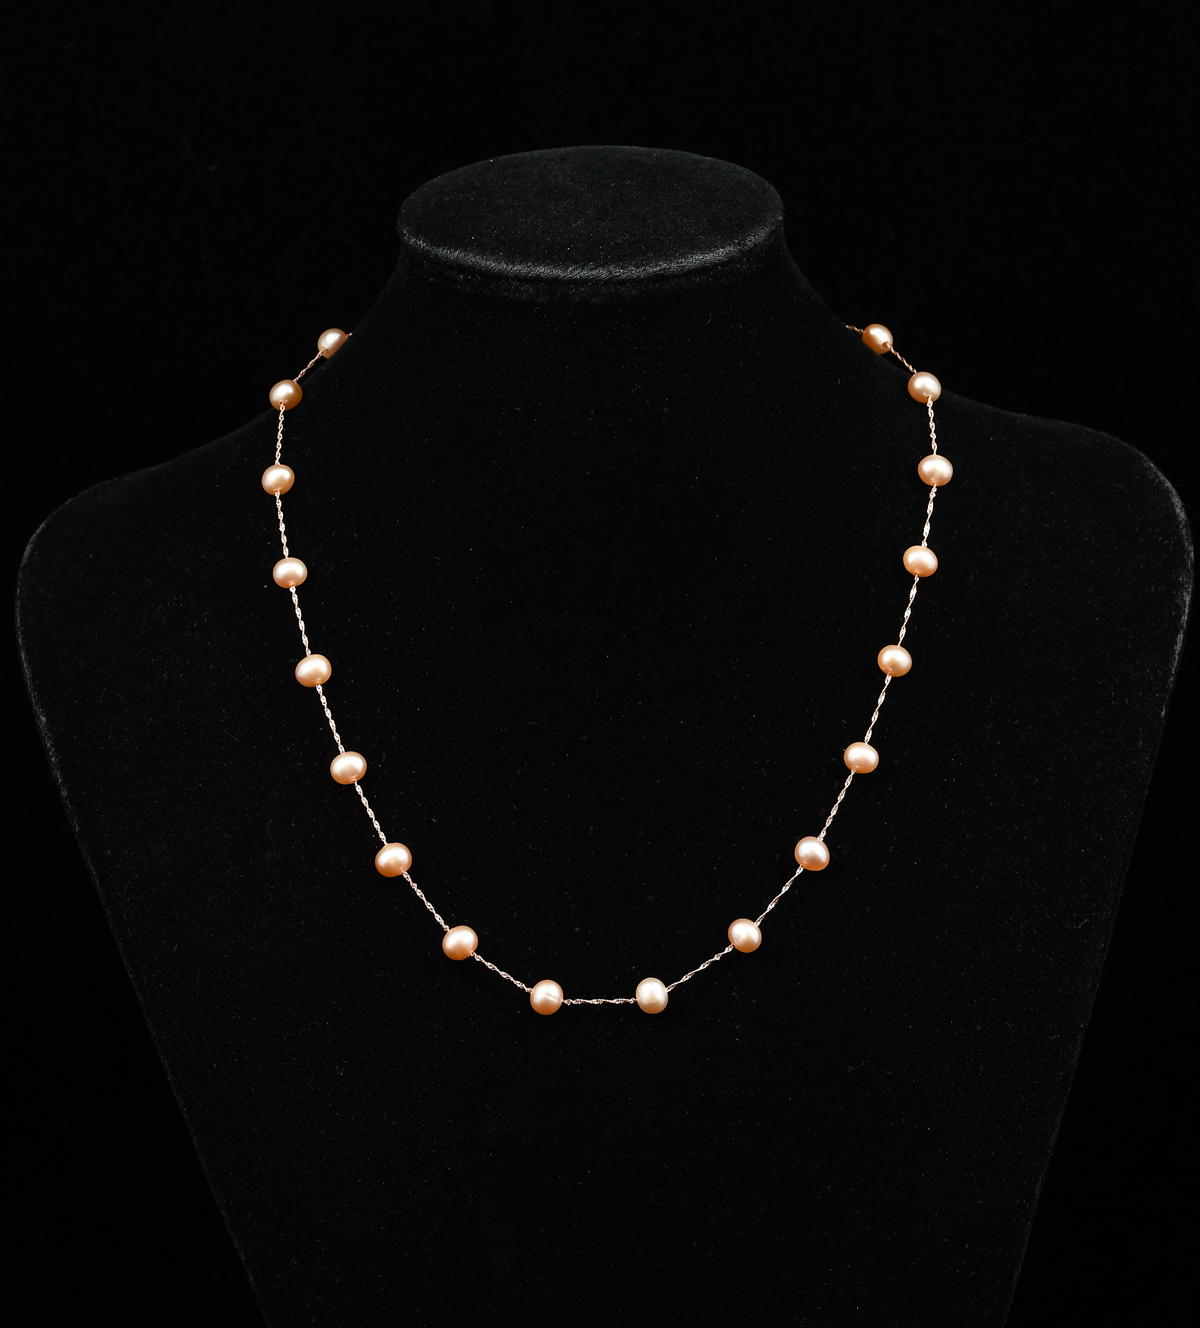 14K ROSE GOLD PEARL NECKLACE: Total